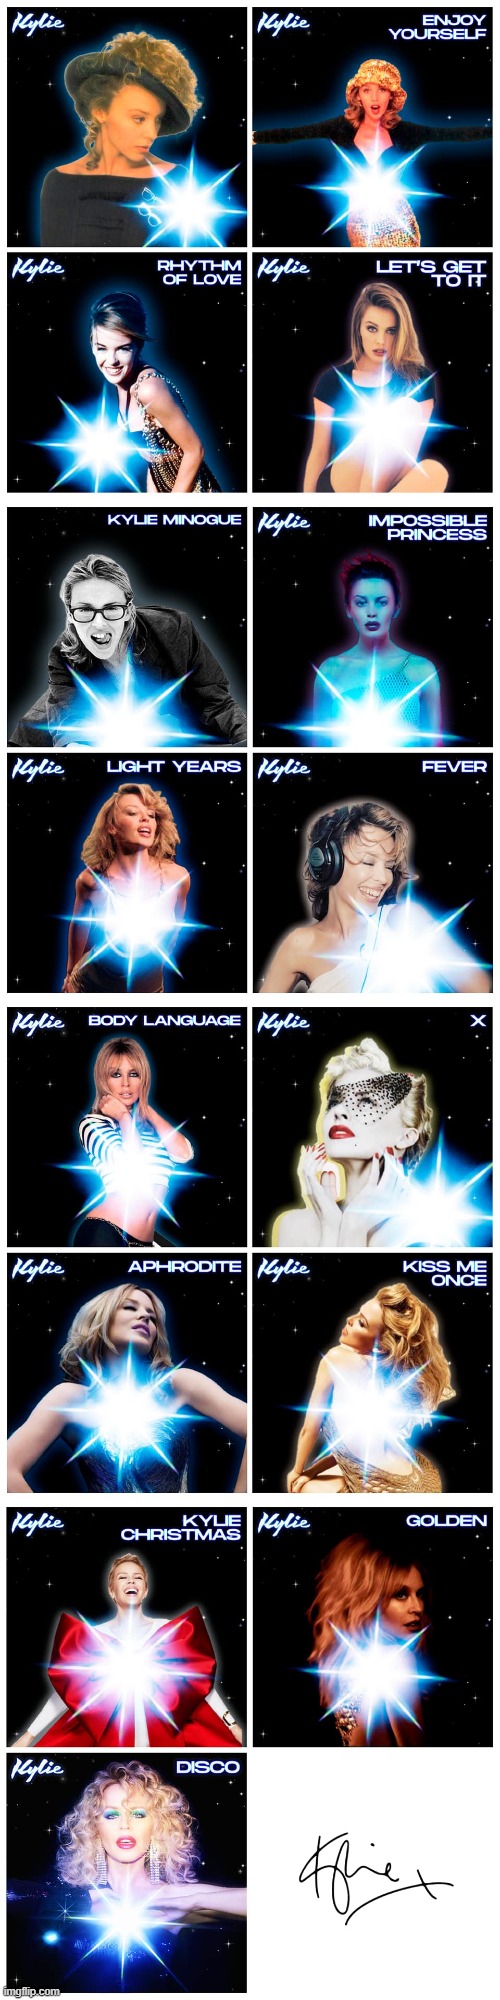 [What if every album were Disco? Now we know] | image tagged in kylie disco covers 1,kylie disco covers 2,kylie disco covers 3,kylie disco covers 4,disco,pop music | made w/ Imgflip meme maker